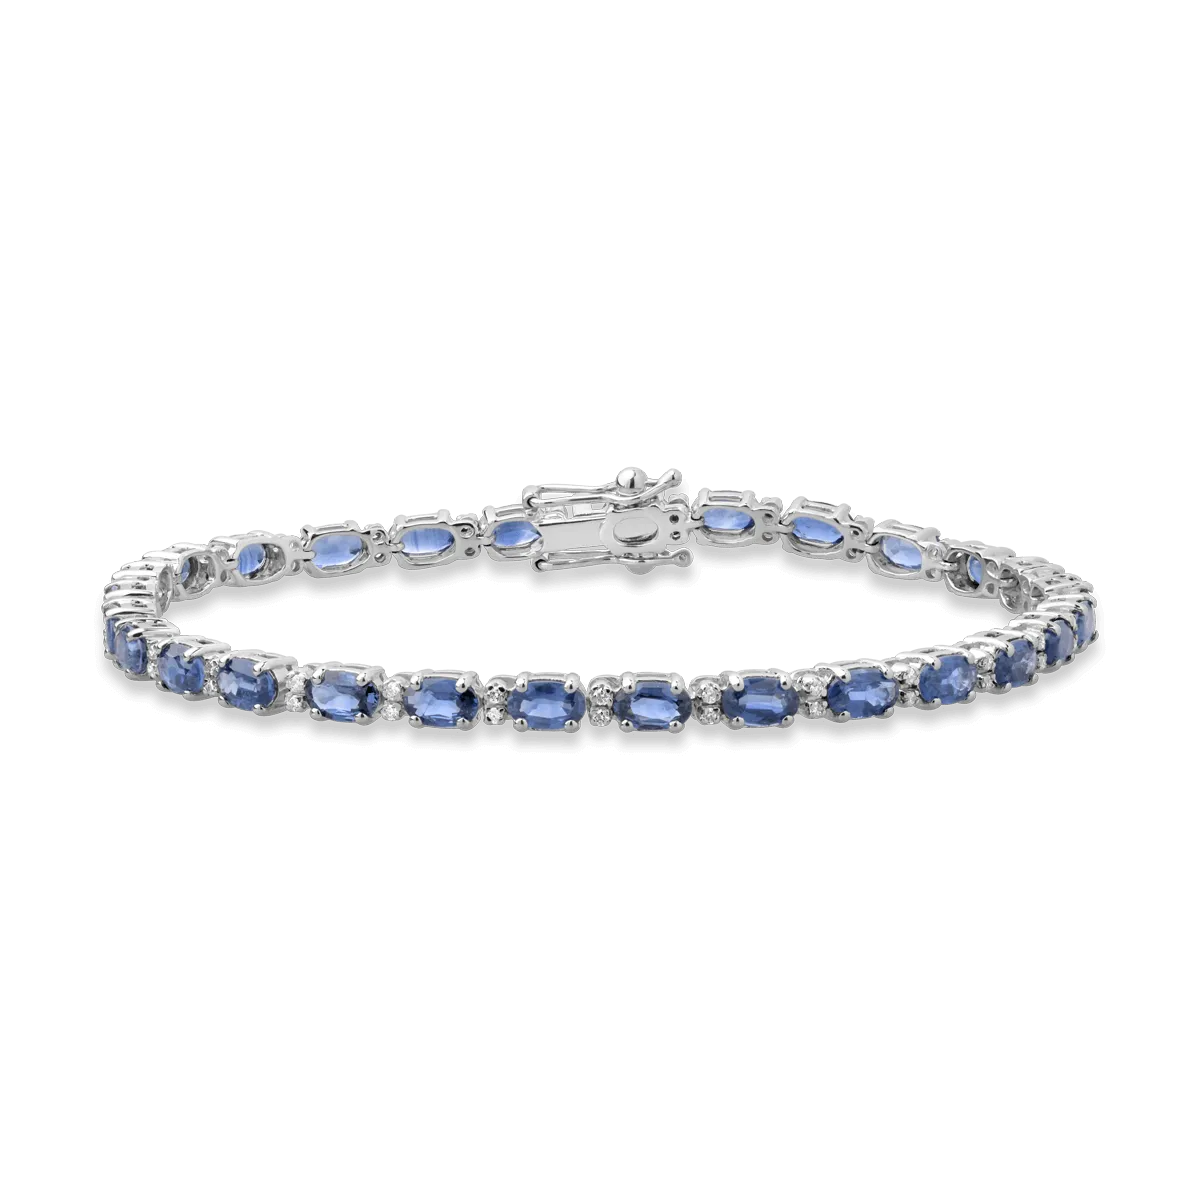 14K white gold tennis bracelet with 8.07ct sapphires and 0.26ct diamonds